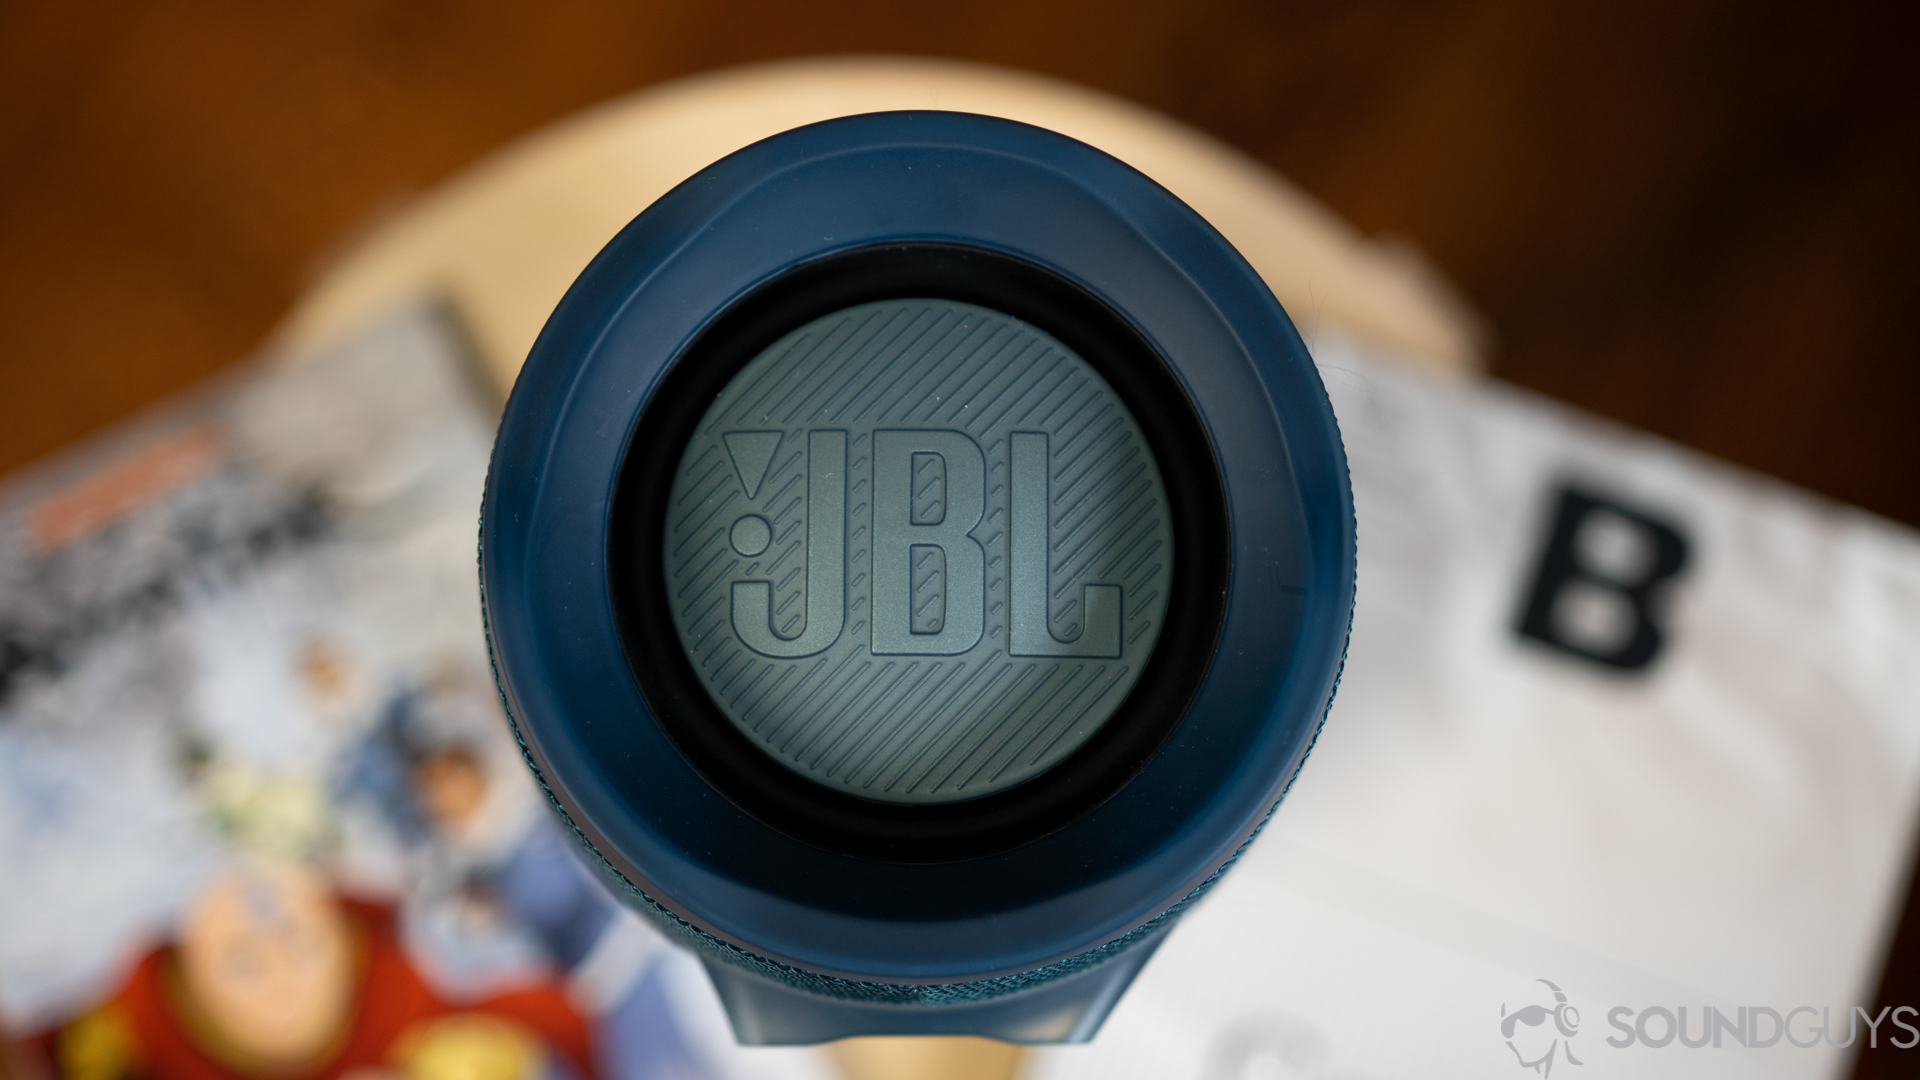 An aerial photo of the JBL logo on the dual passive radiators of the Xtreme 2.